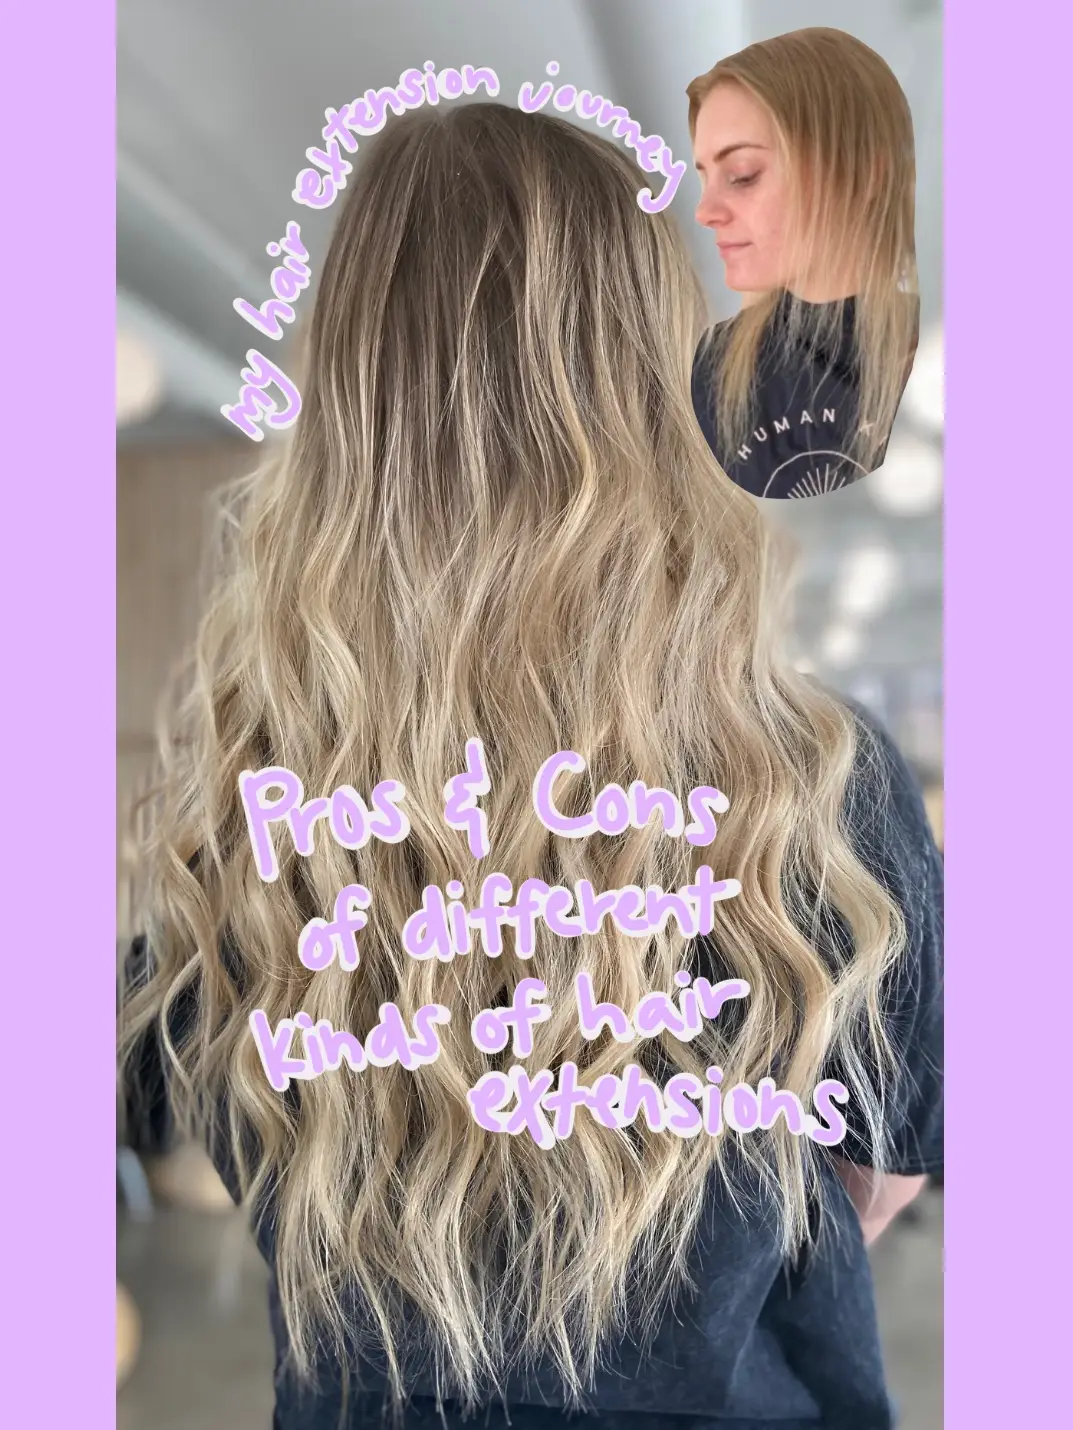 Curly Hair Extensions: All The Types Available and How to Take Care of Them